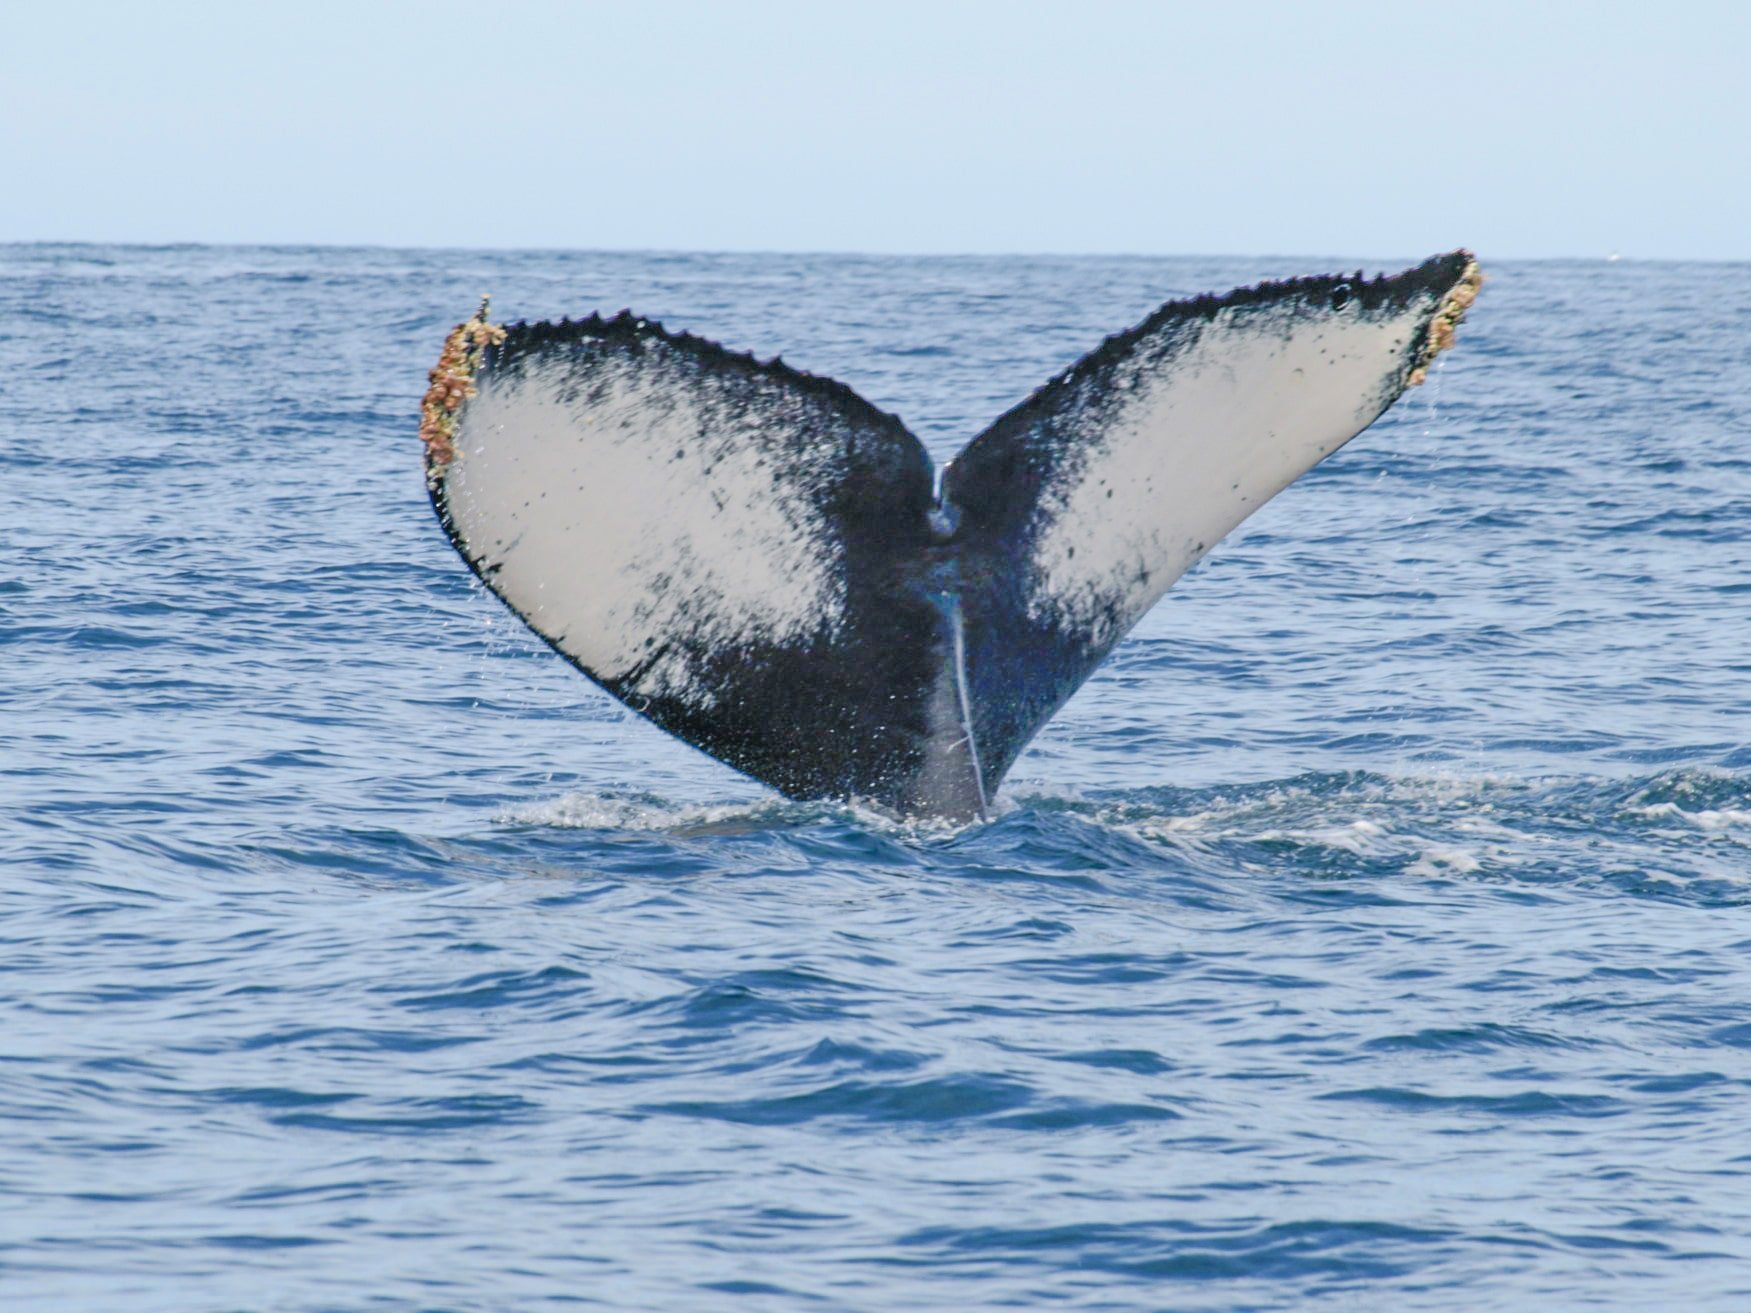 Humpback whale sticking its tail out of the water